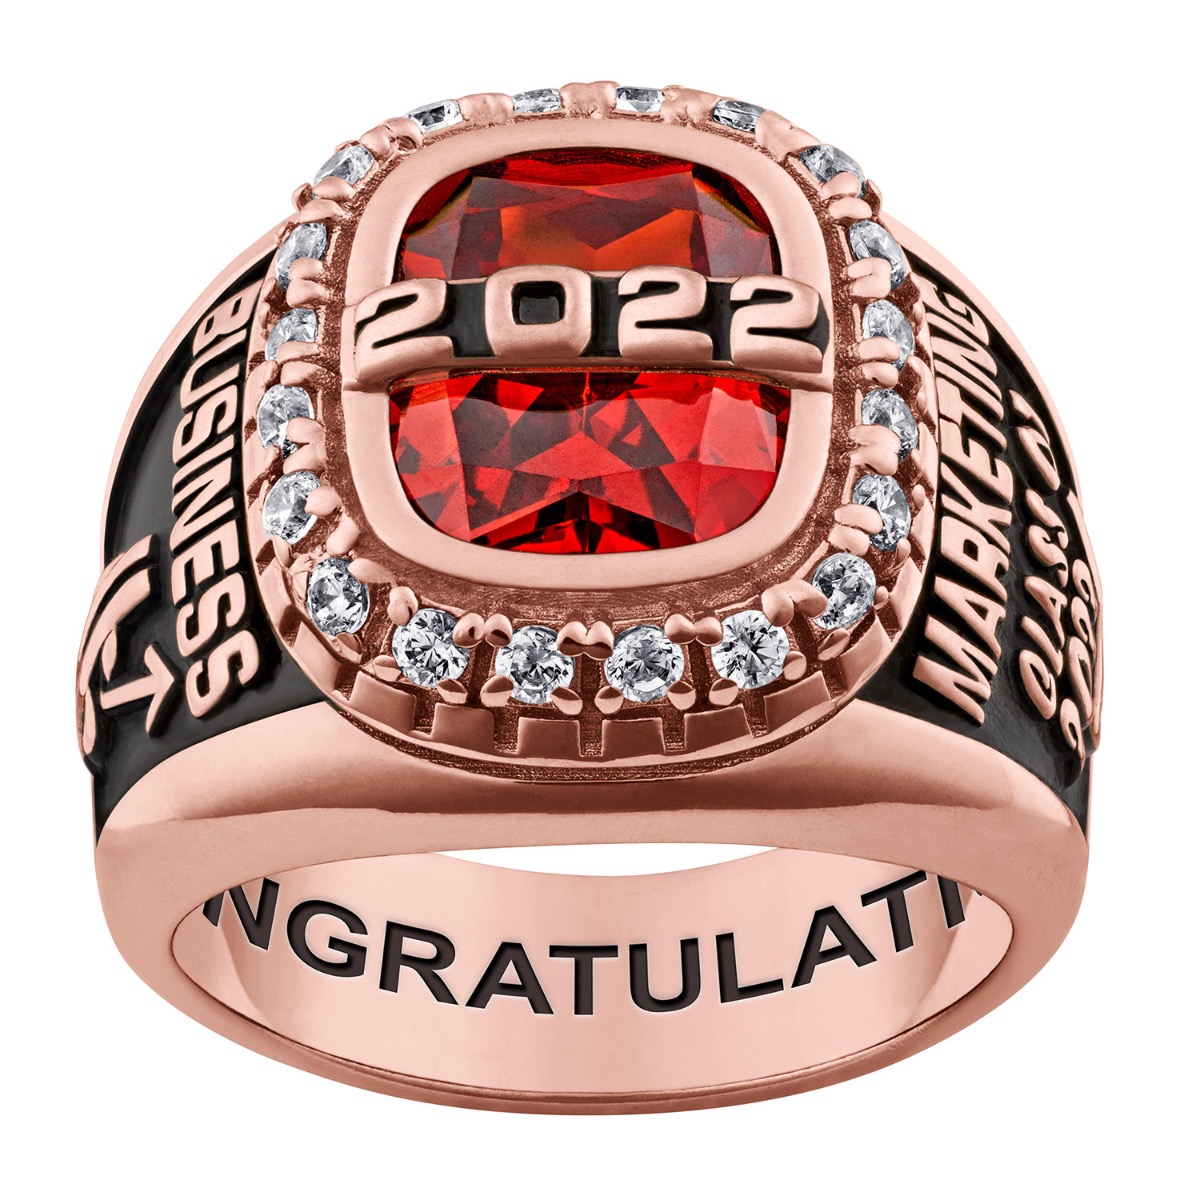 Rose Goldtone CZ Encrusted Personalized Top Class Ring